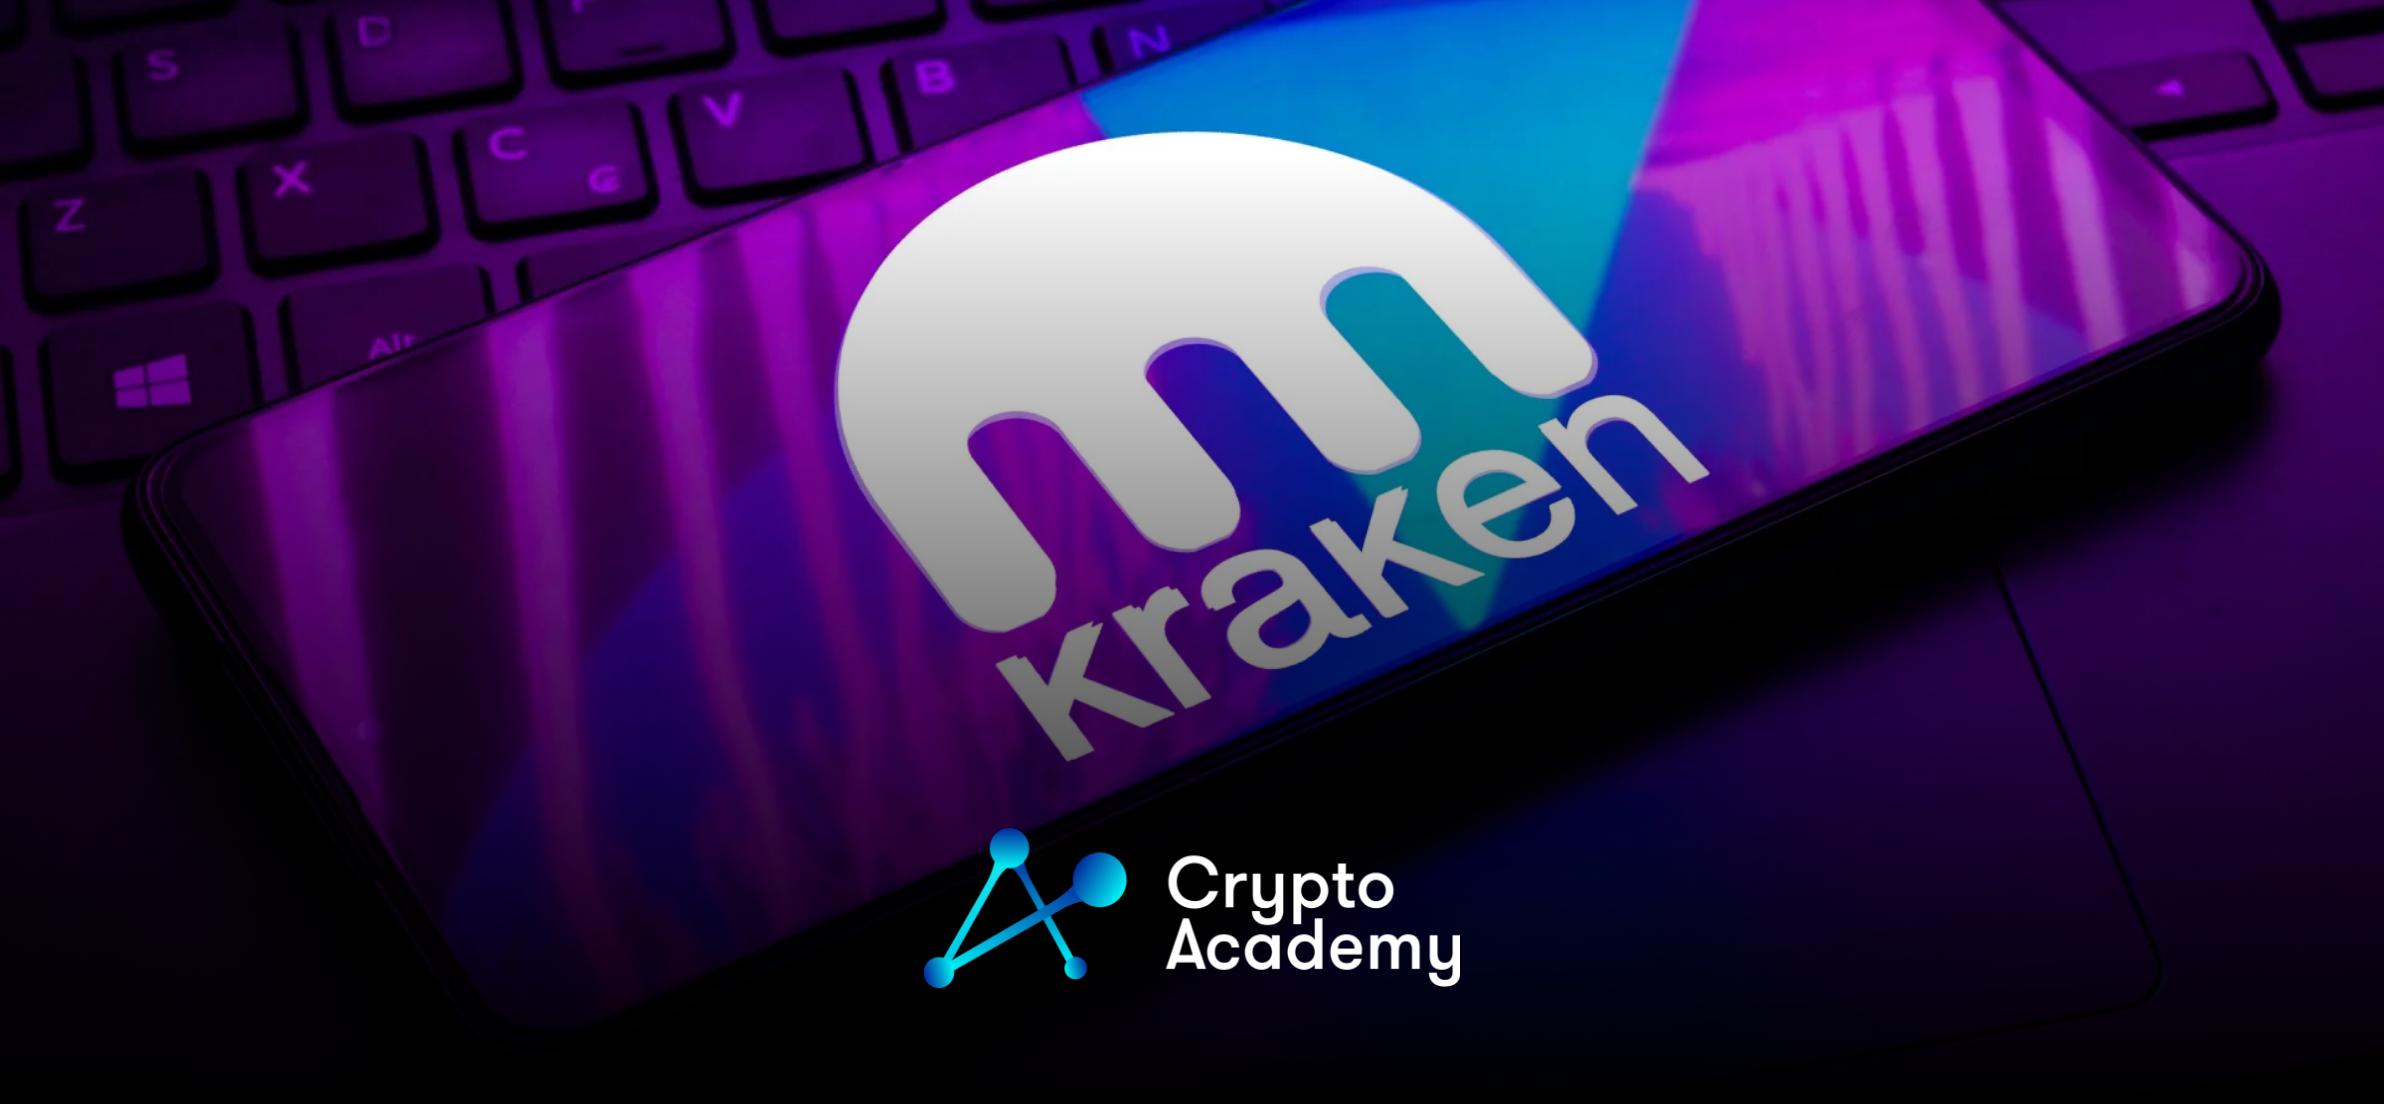 Kraken to Disclose Information of 42,000 Users to the IRS